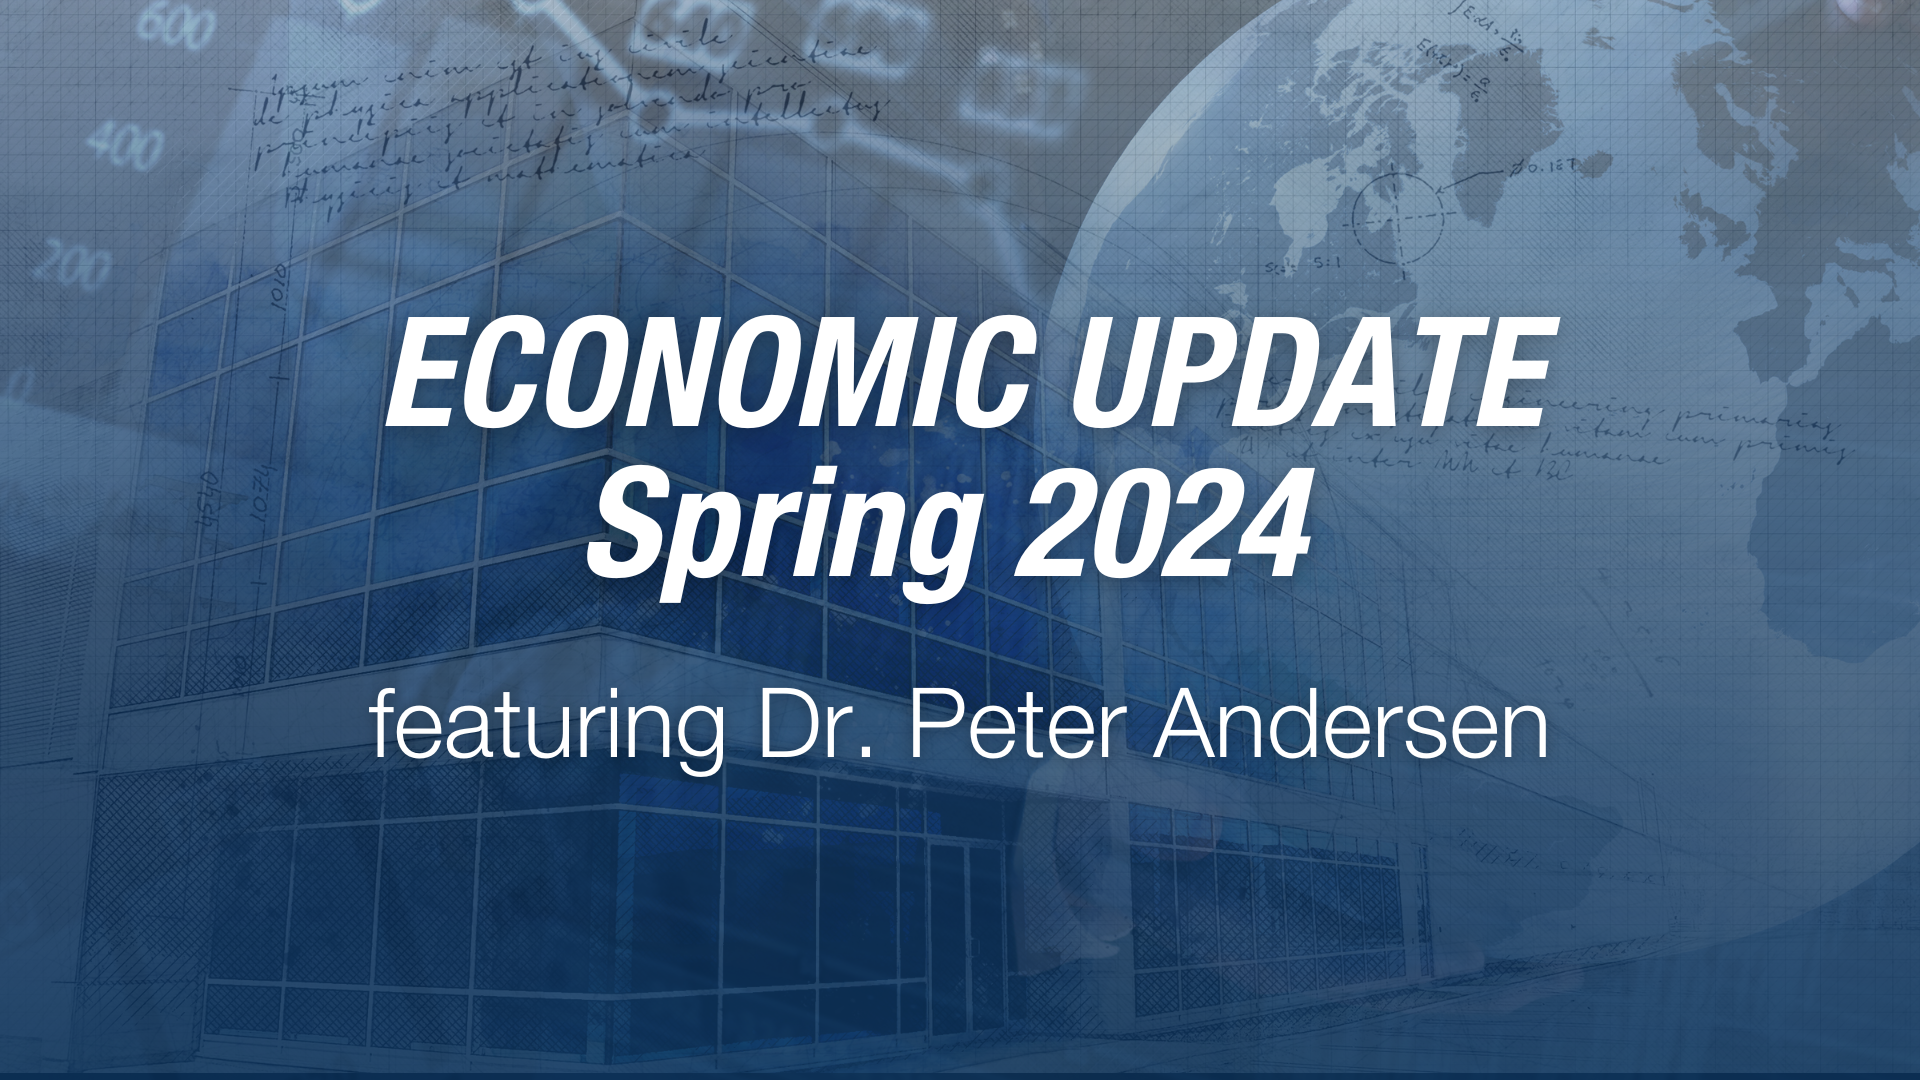 Spring 2024 Economic Update for Canadian Business Leaders